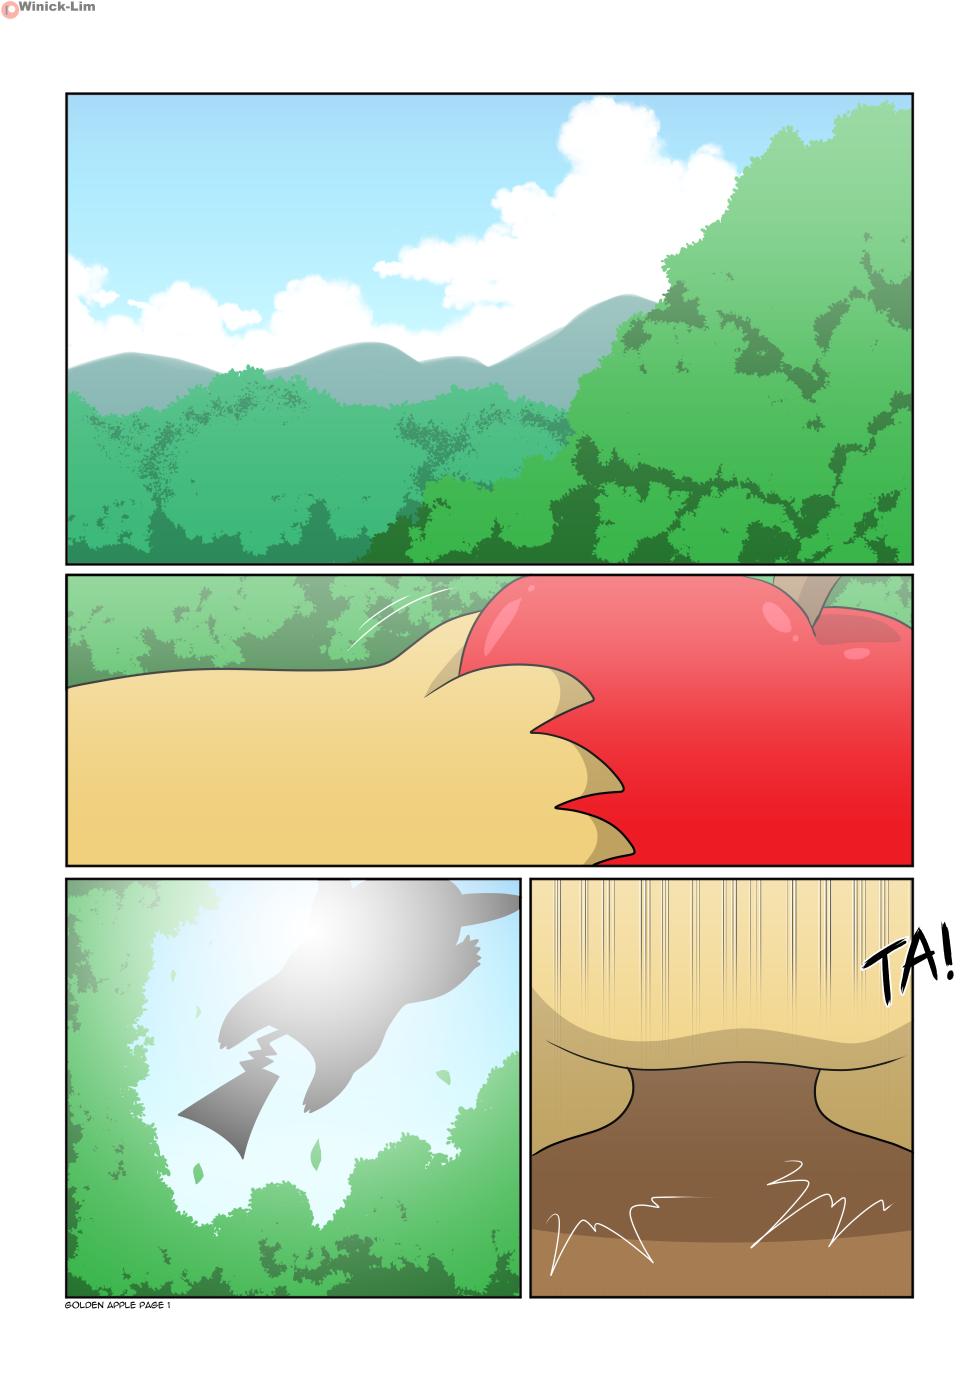 [Winick-Lim]~ Golden Apple - Page 1